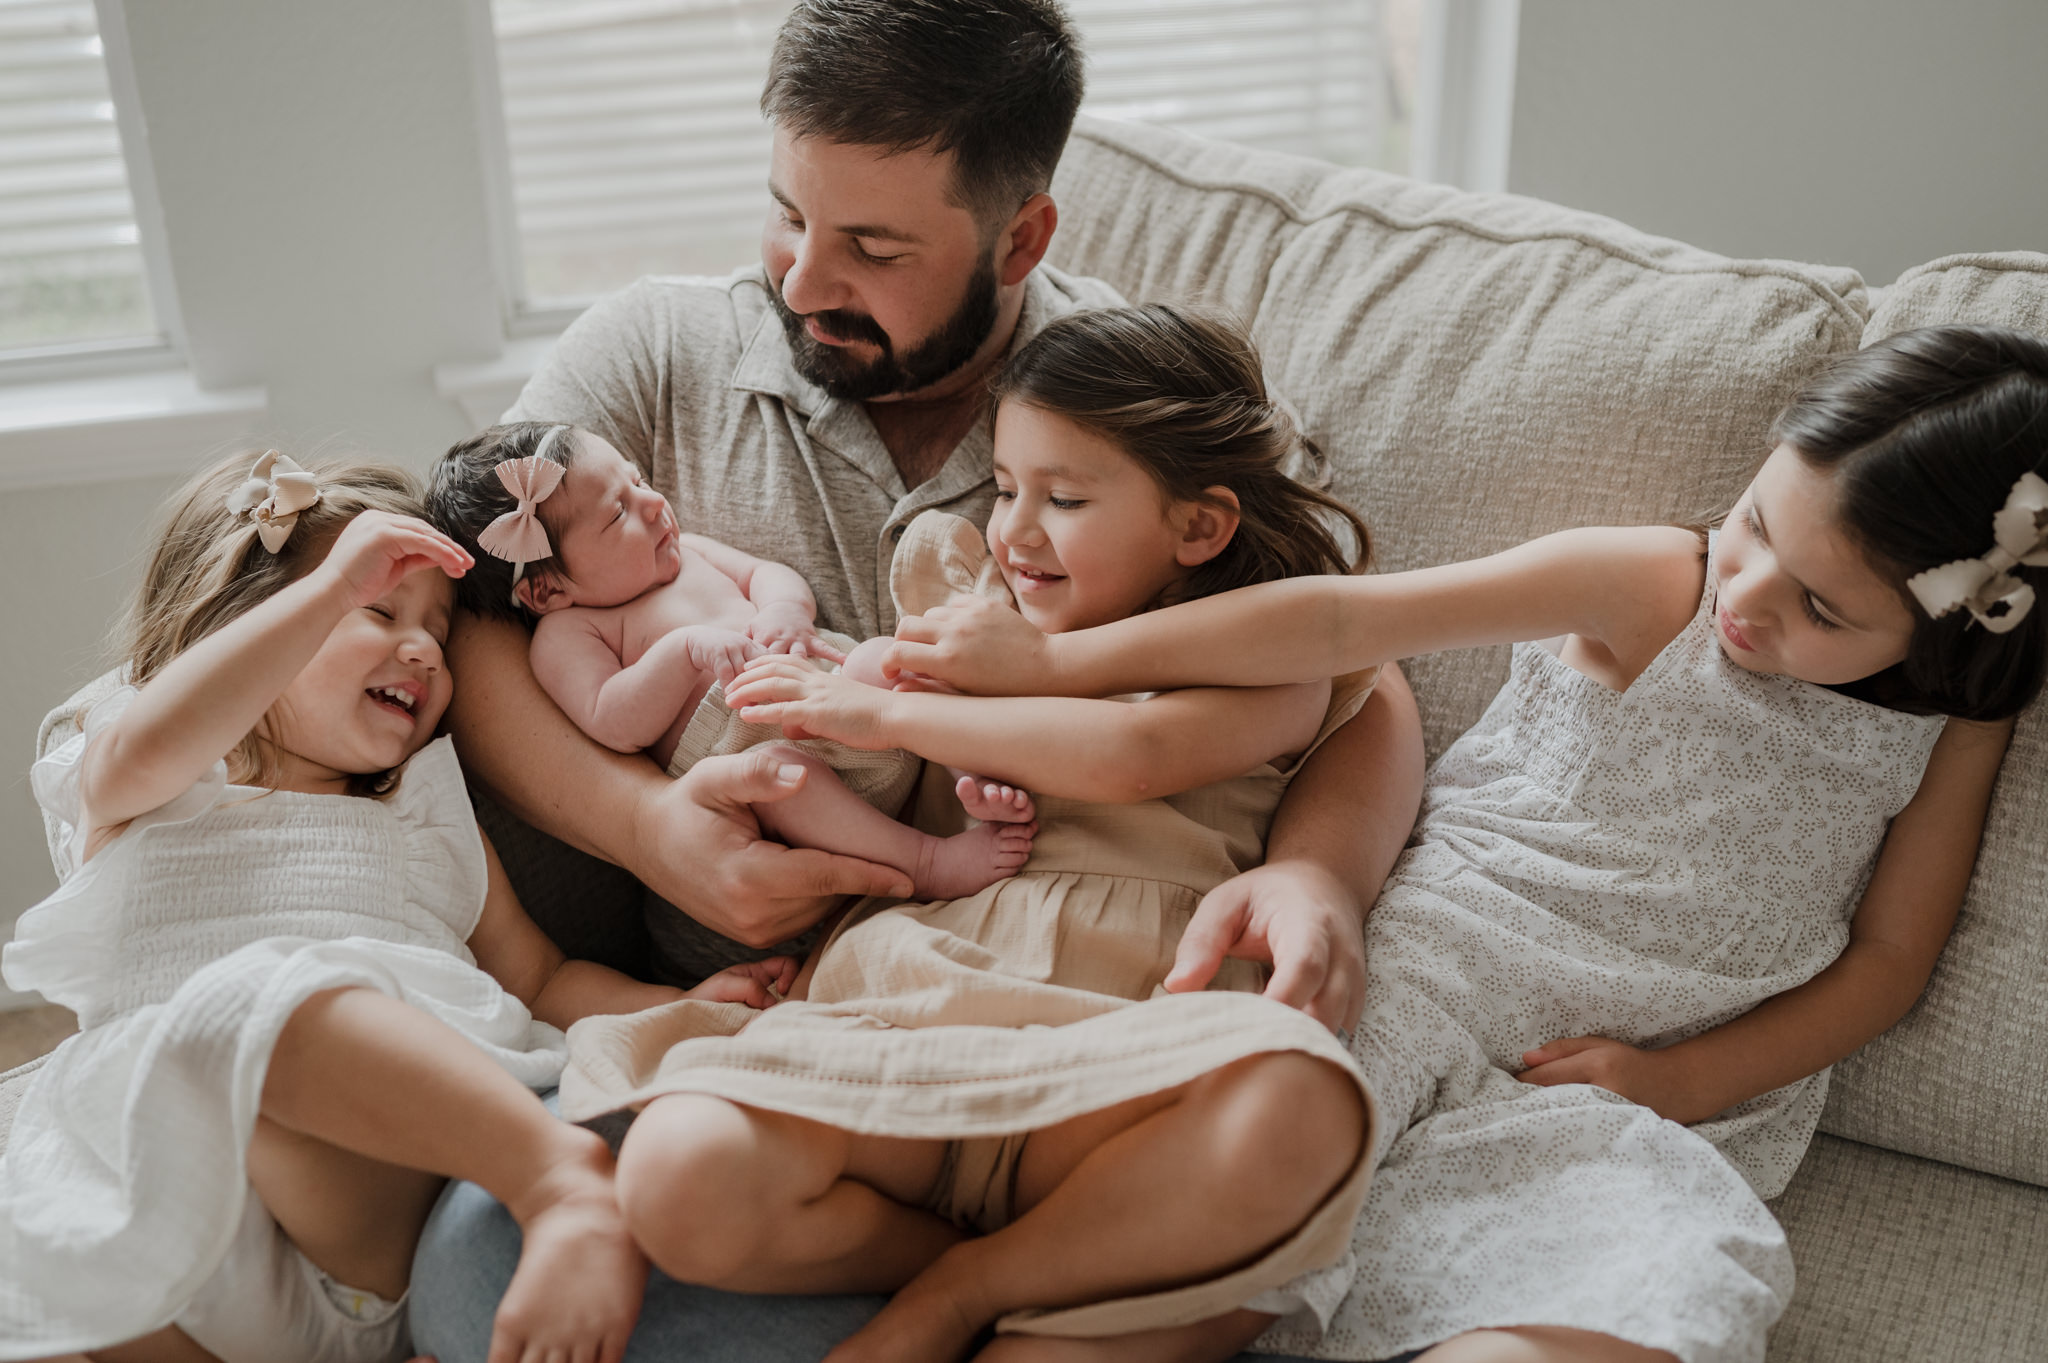 Three sisters sit on a couch playing with their newborn baby sister in dad's arms